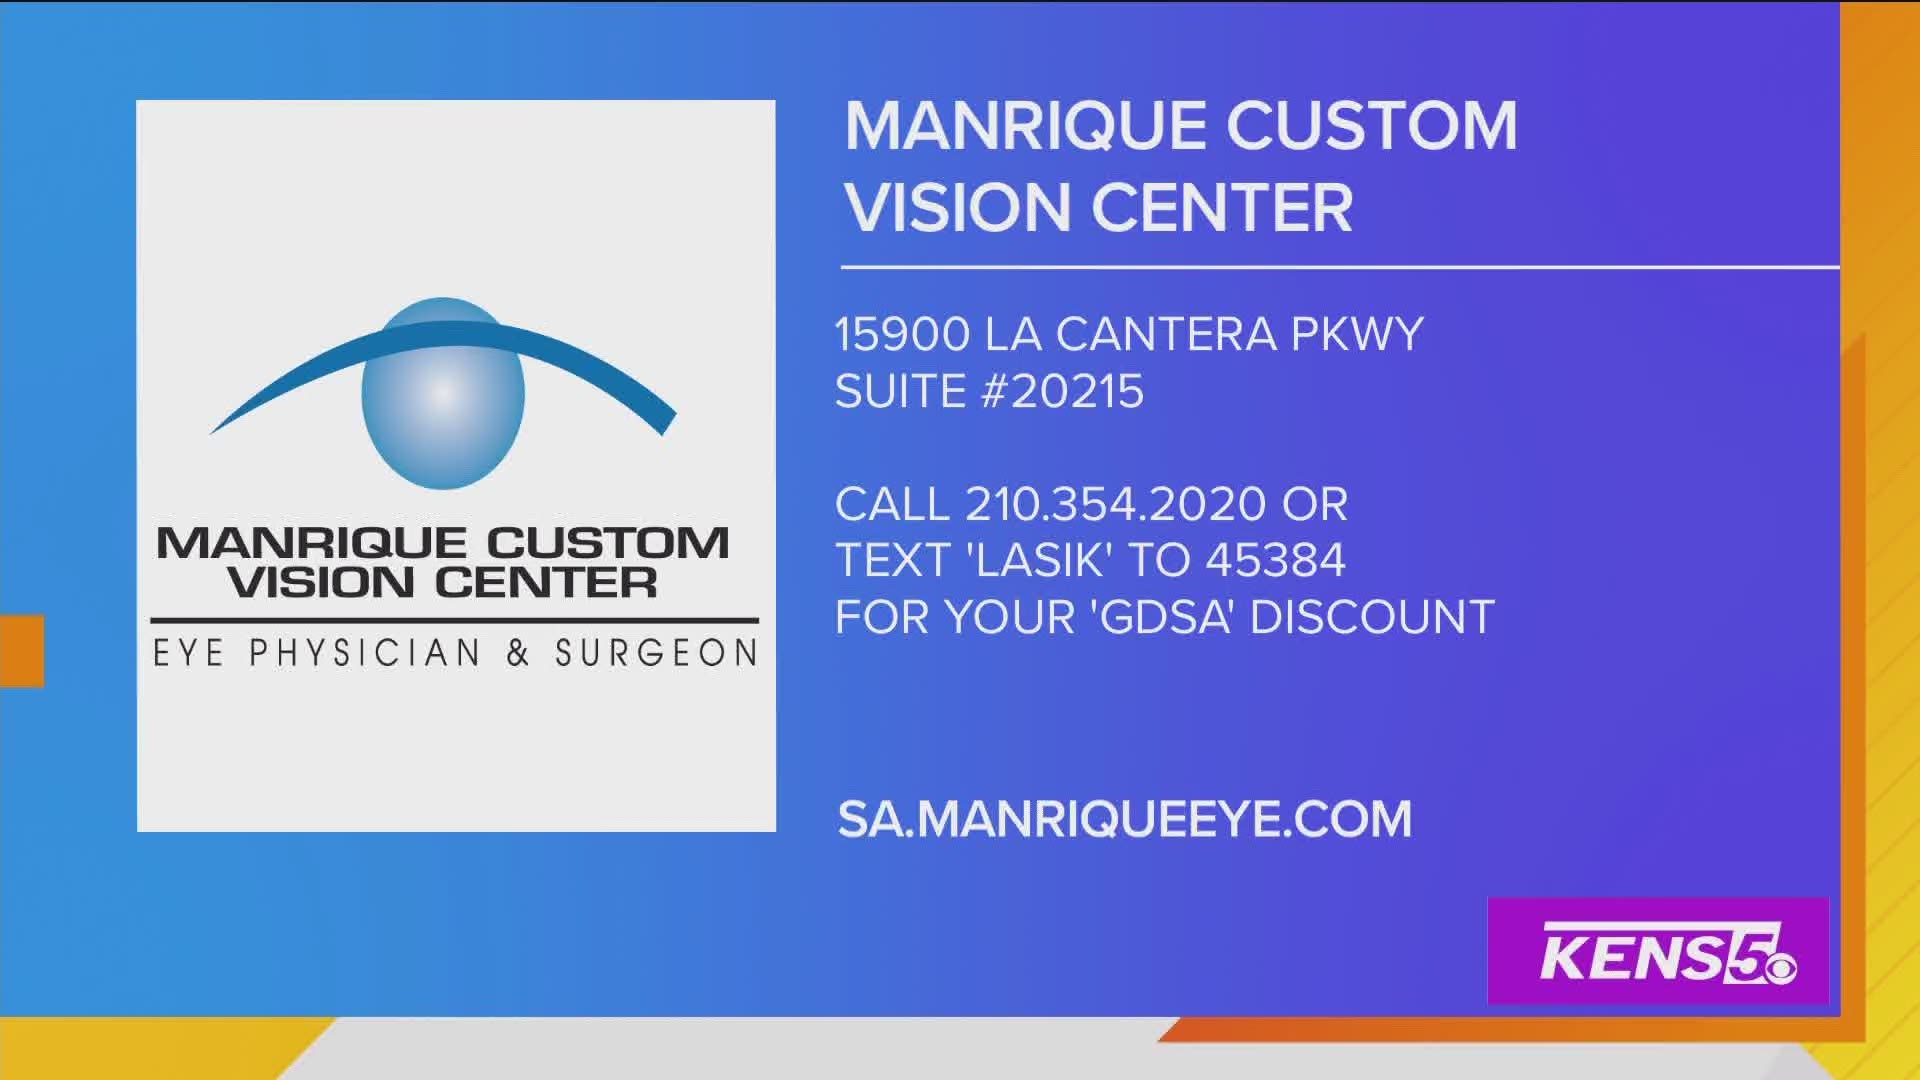 Manrique Custom Vision is still serving San Antonians with top-notch LASIK surgery during Covid-19.